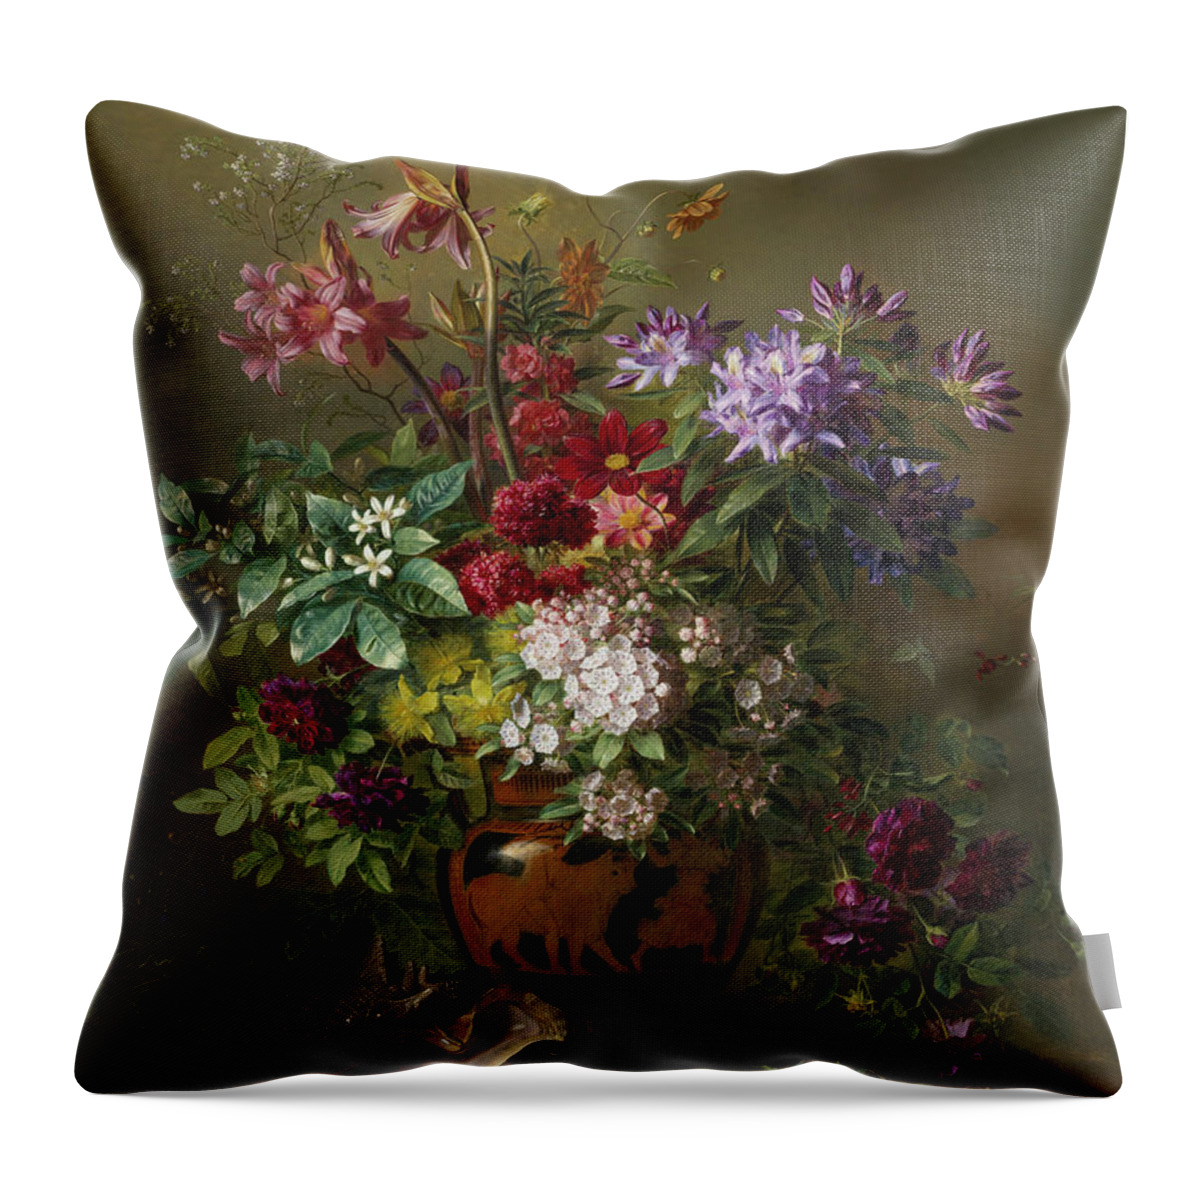 Aged Throw Pillow featuring the painting Allegory of Spring by Georgius Jacobus Johannes van Os